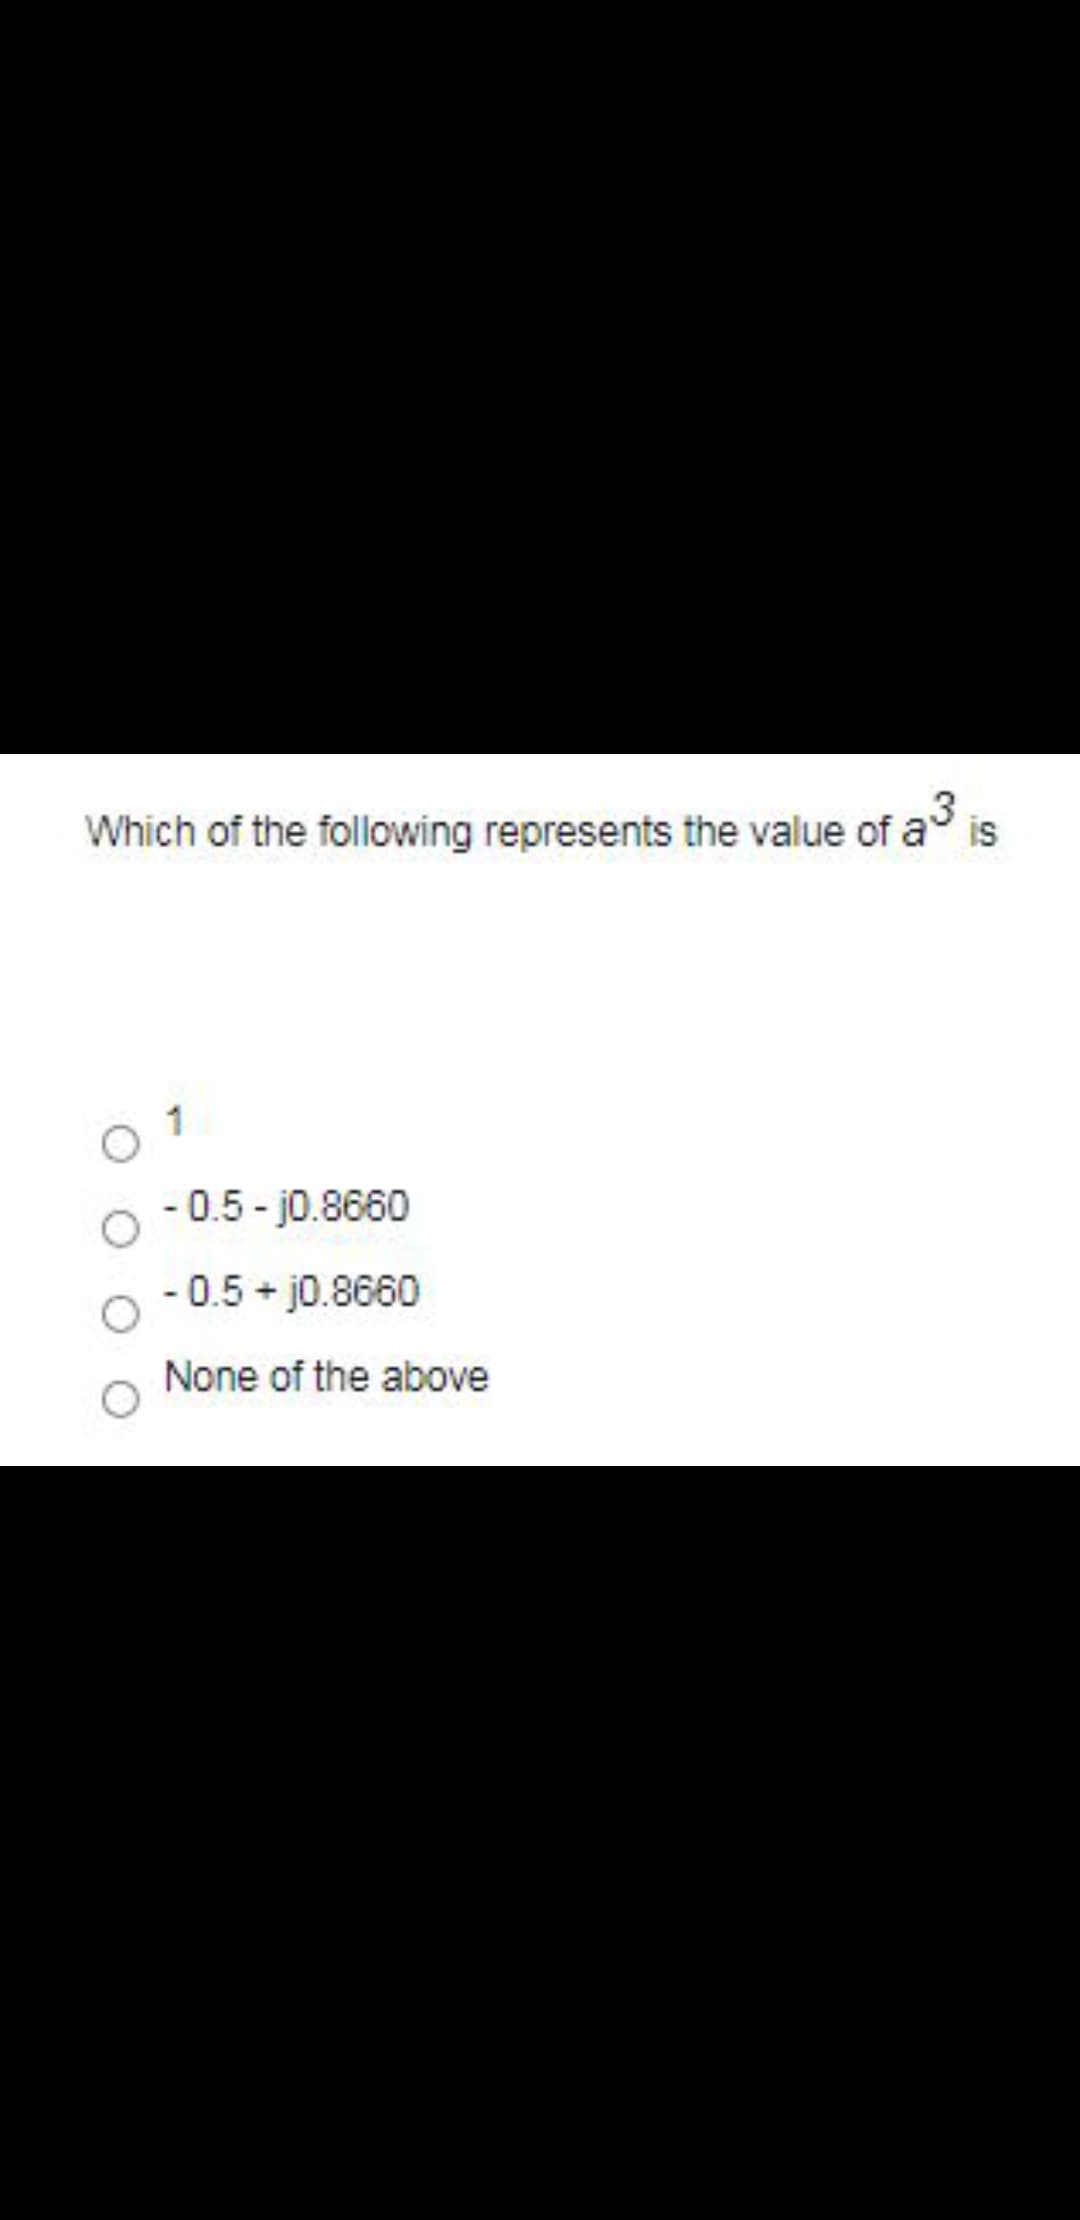 Which of the following represents the value of a is
1
- 0.5 - j0.8660
- 0.5 + j0.8660
None of the above
